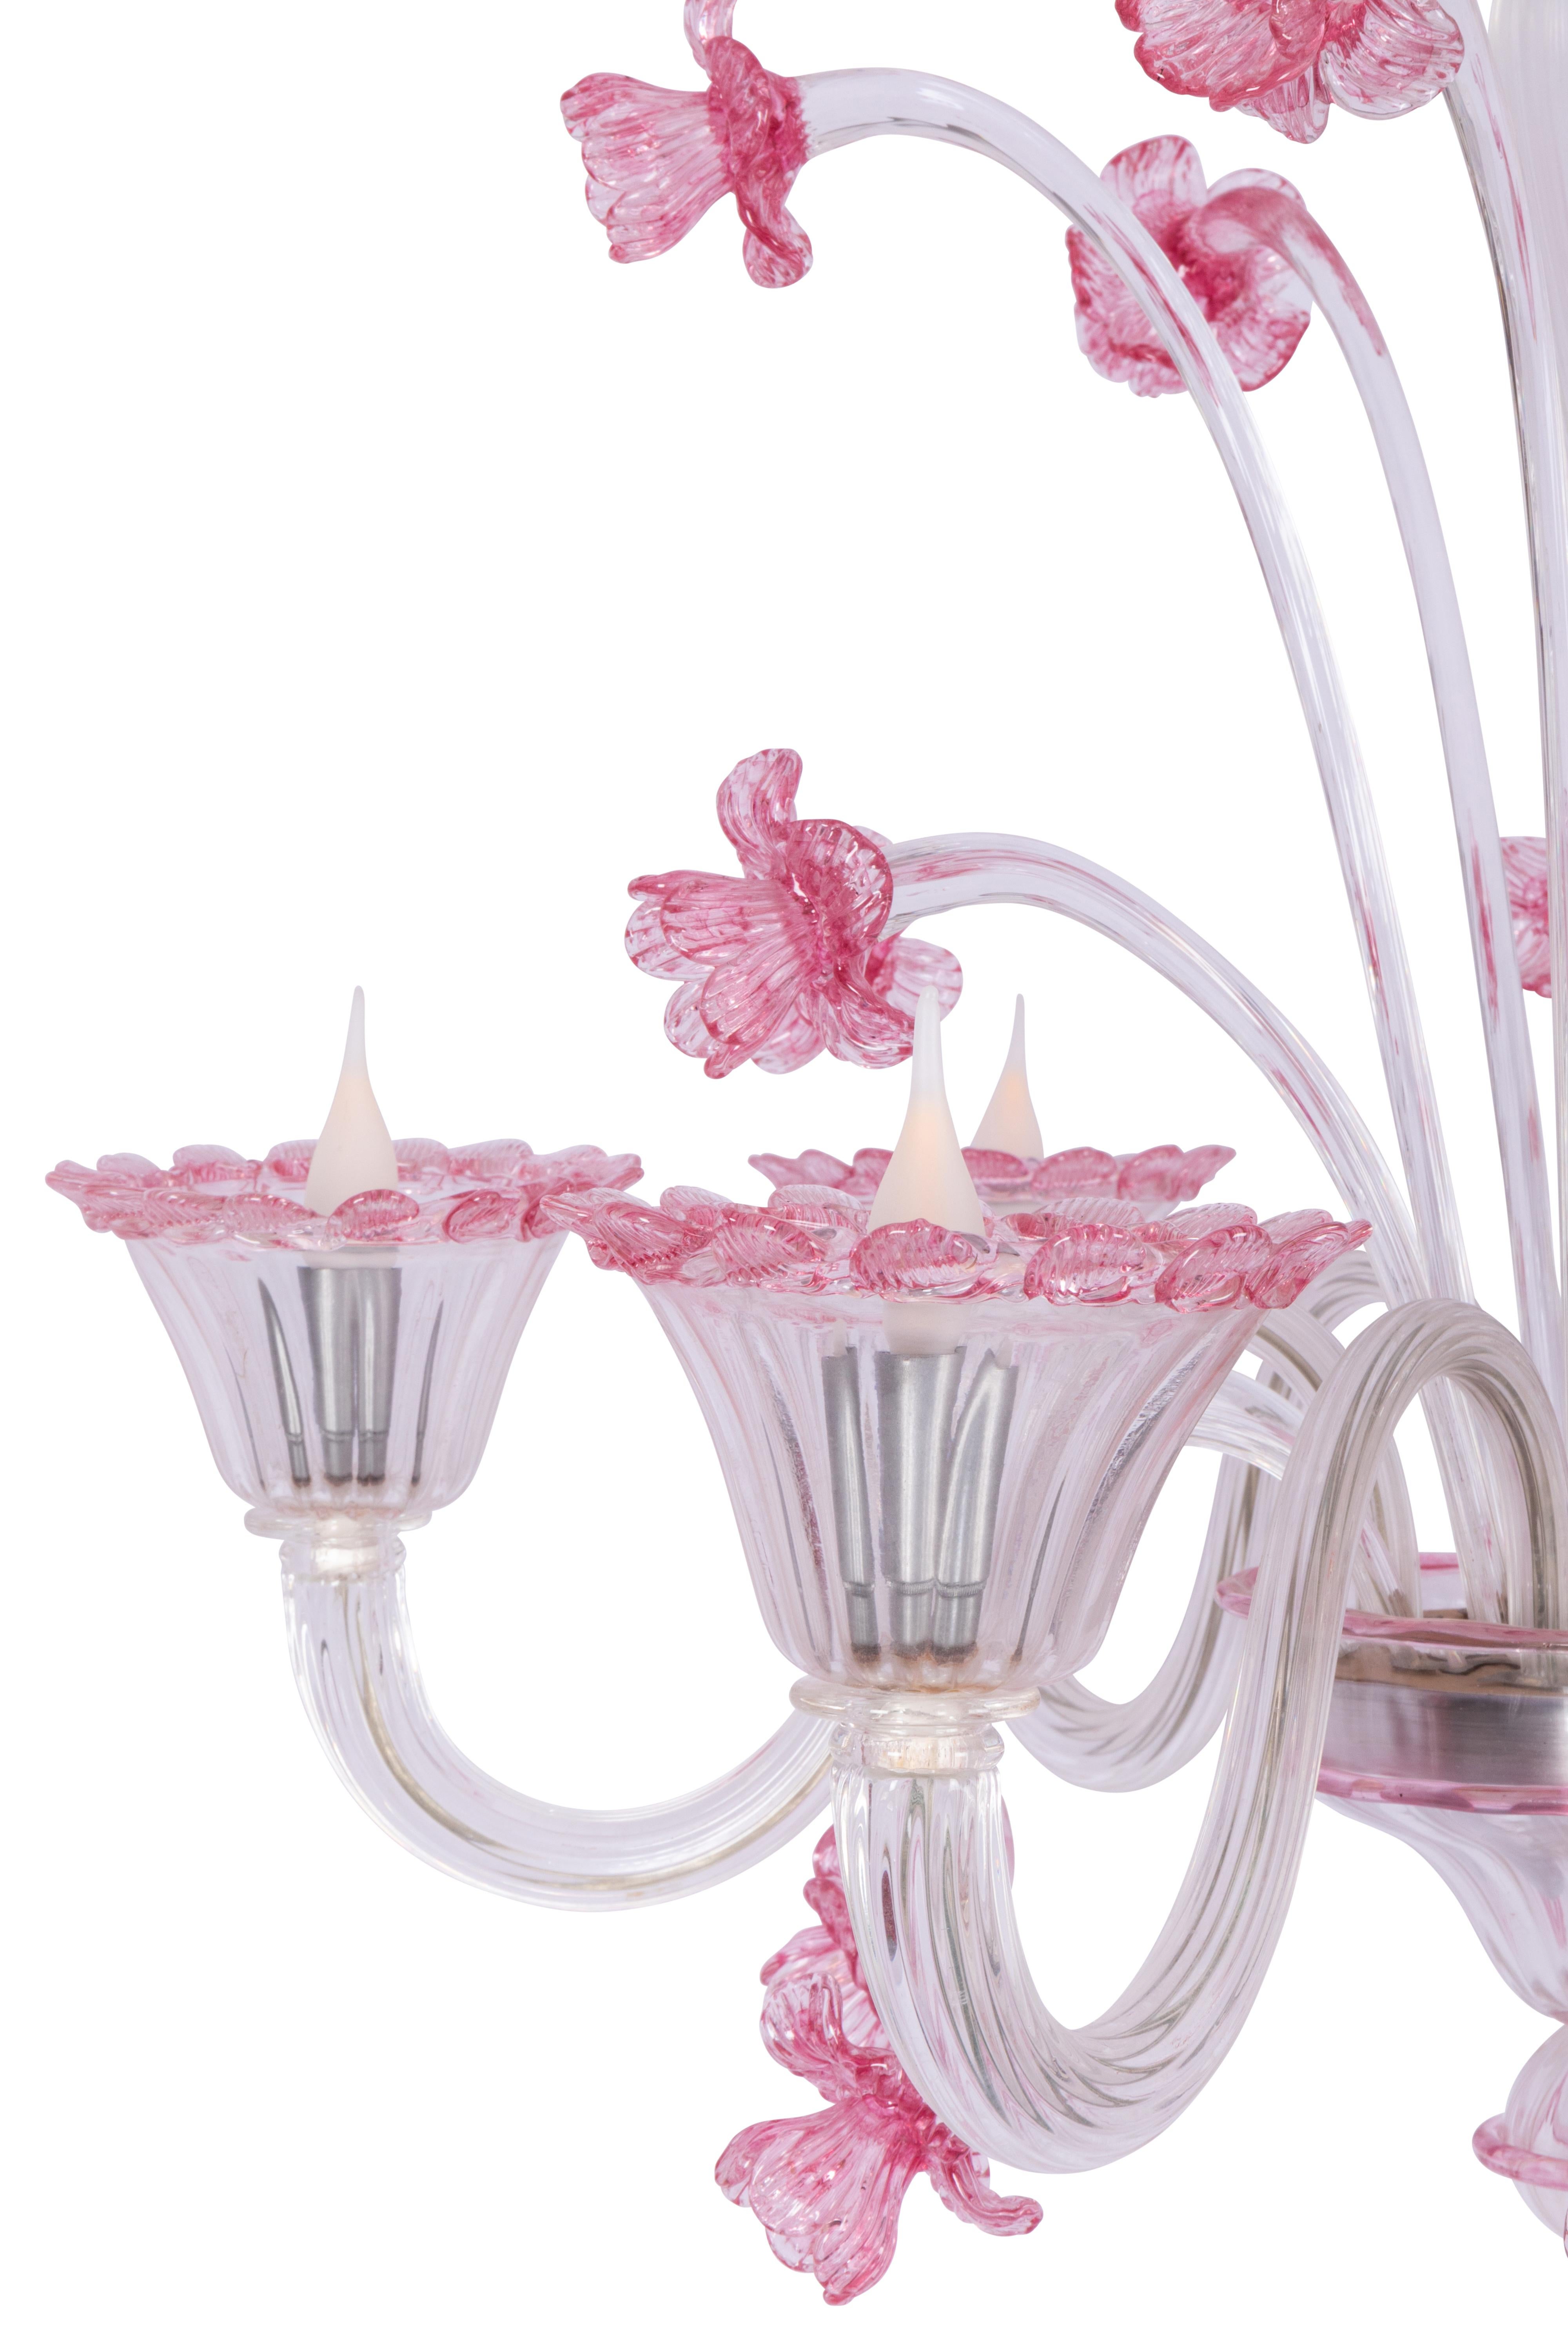 Classic coloured Murano blown and bent glass Pastoral chandelier with festive floral design elements; richly decorated with flowers and leaves in transparent or pink glass.

The chandelier has 6 arms and lights, is in perfect condition and dates